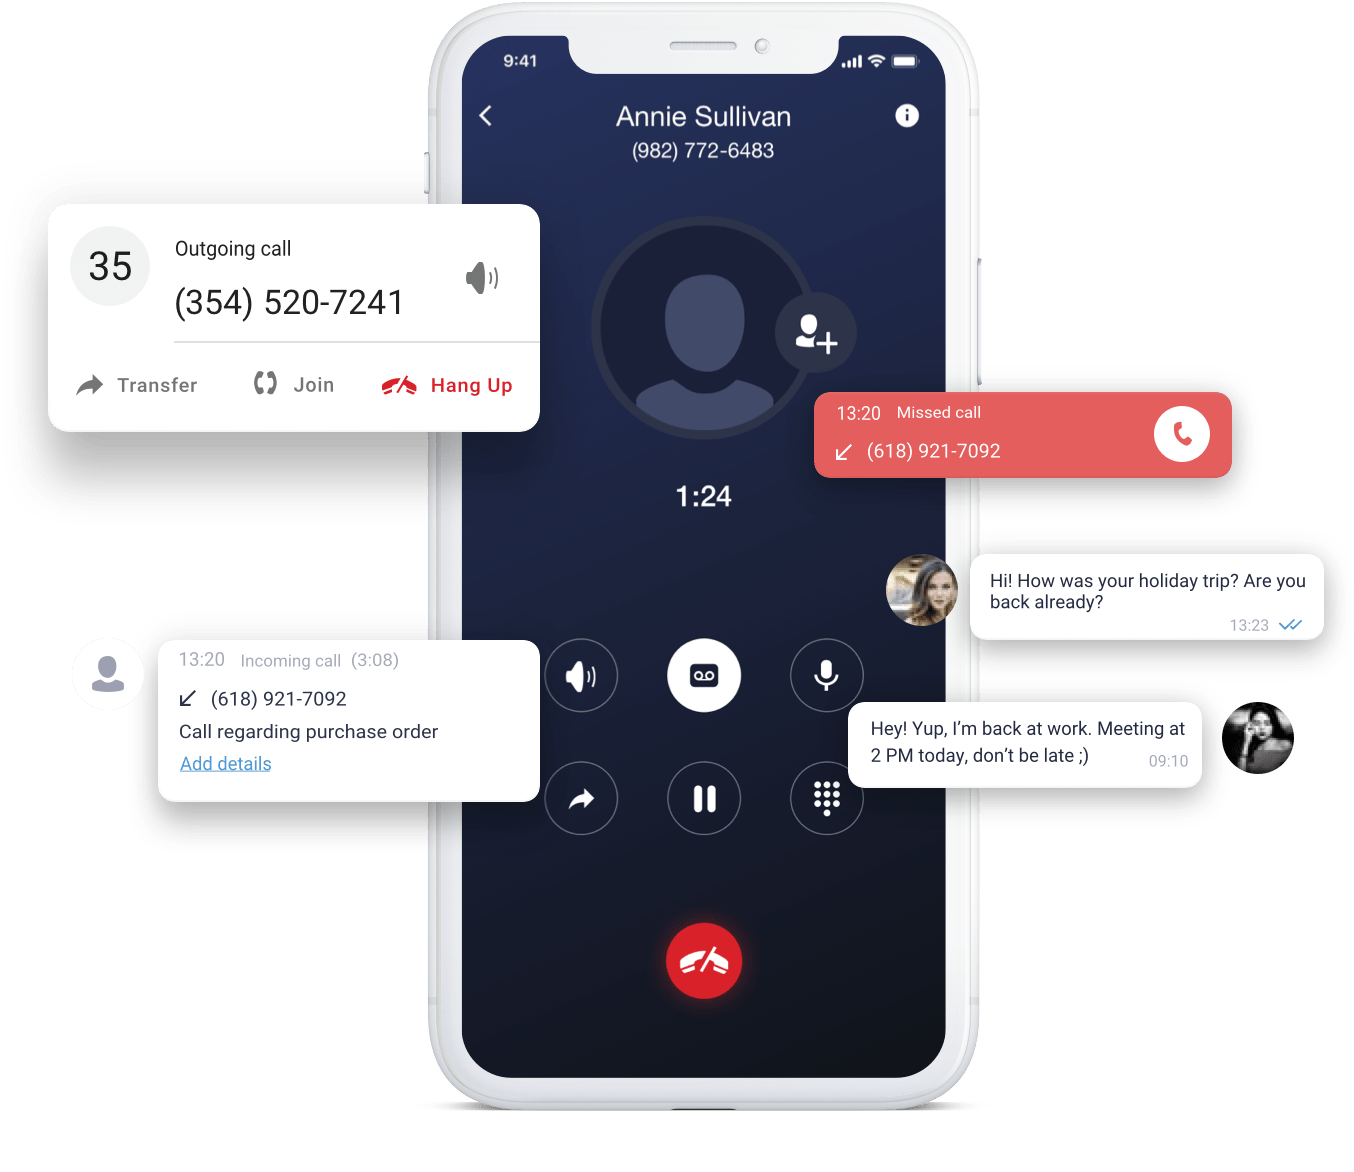 Ringotel mobile app with call recording enabled and chat next to it